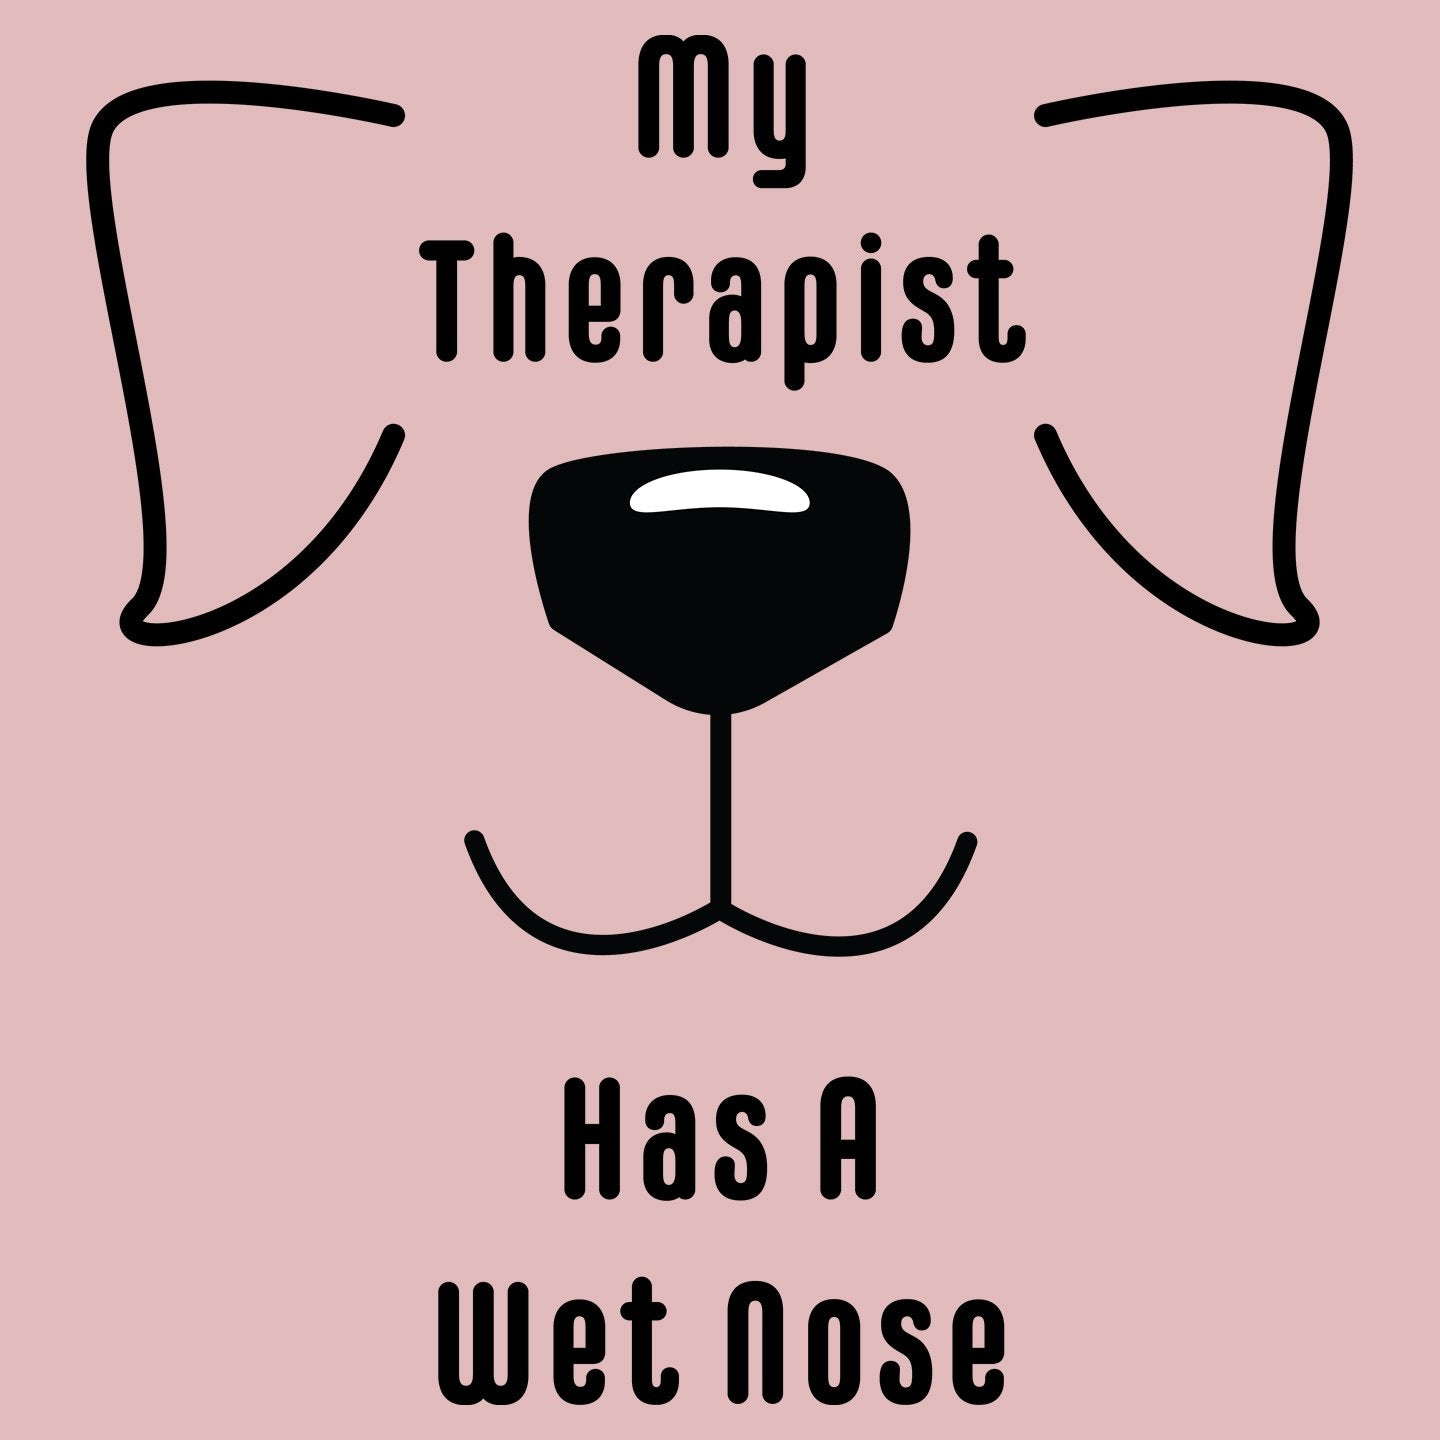 My Therapist Has A Wet Nose - Women's Fitted T-Shirt